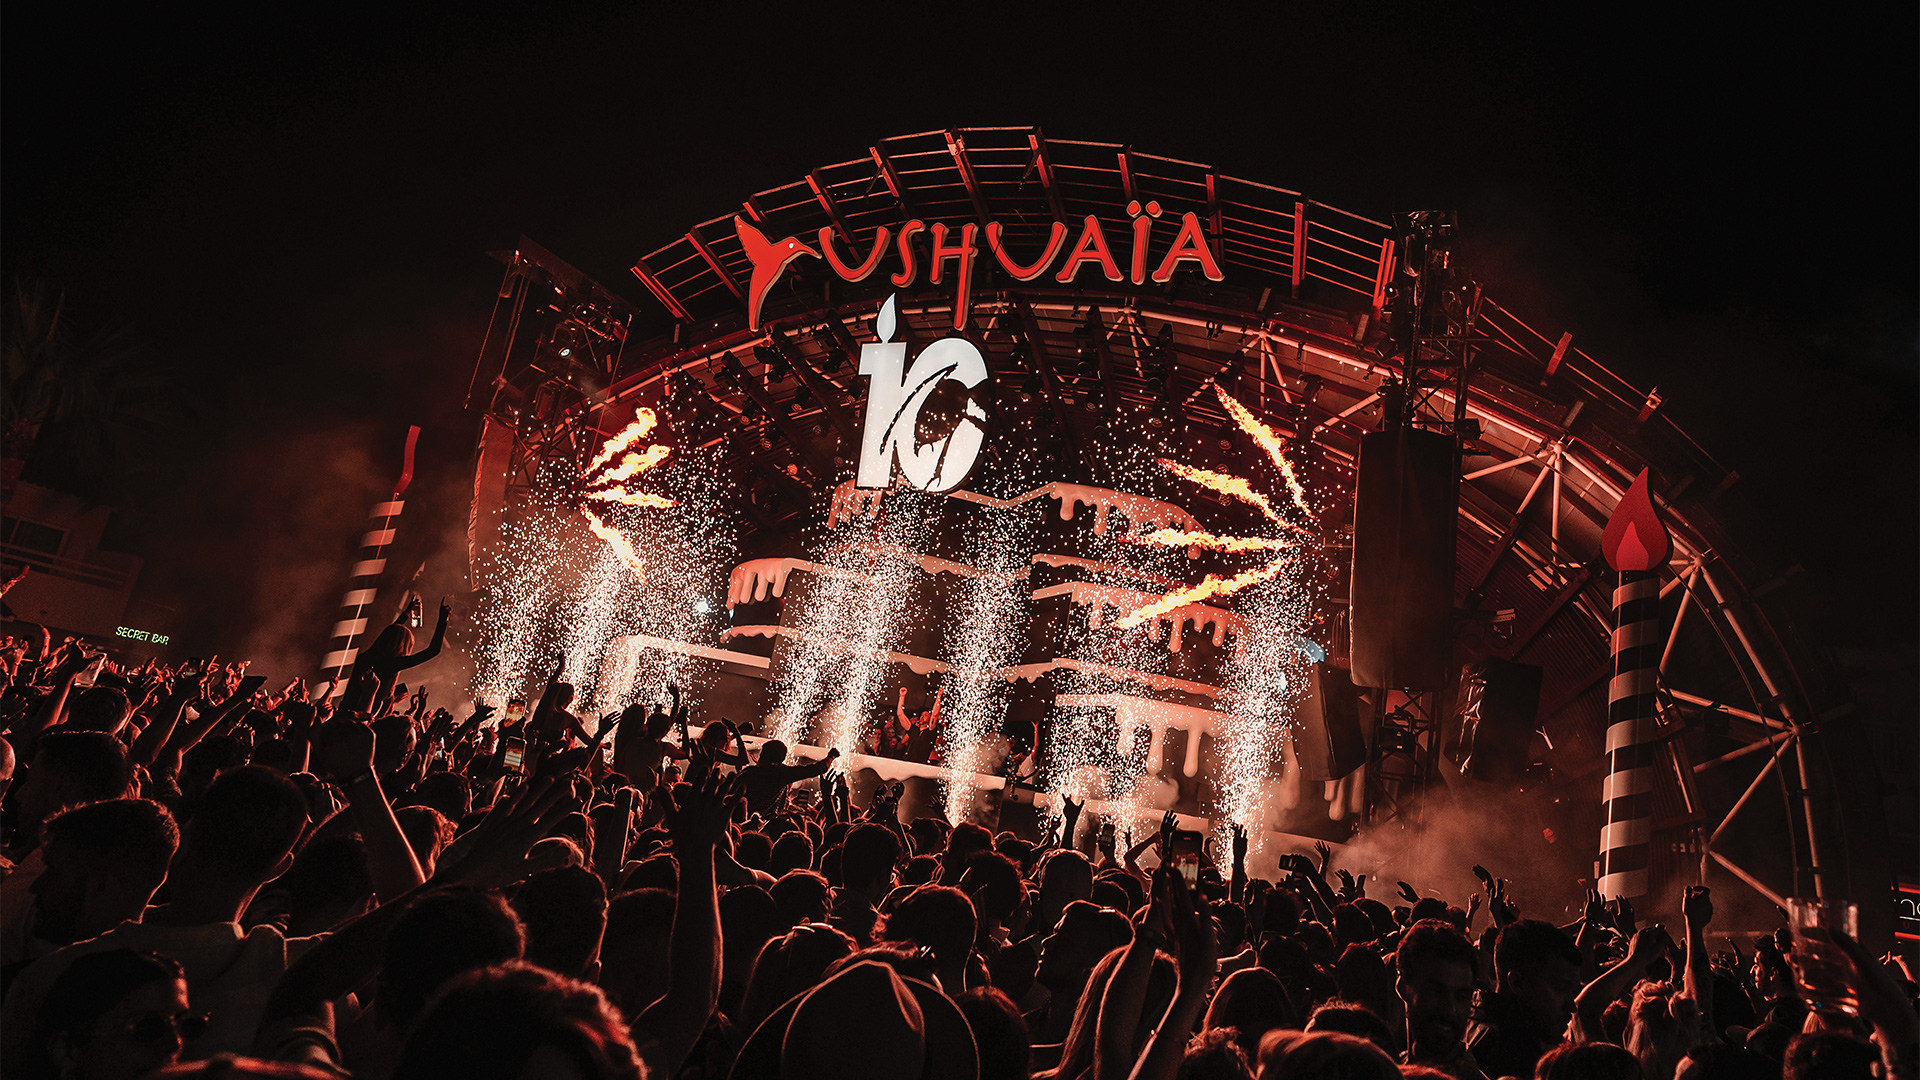 Photo of the Ushuaïa Ibiza stage with red lights and the ANTS 10 celebratory logo